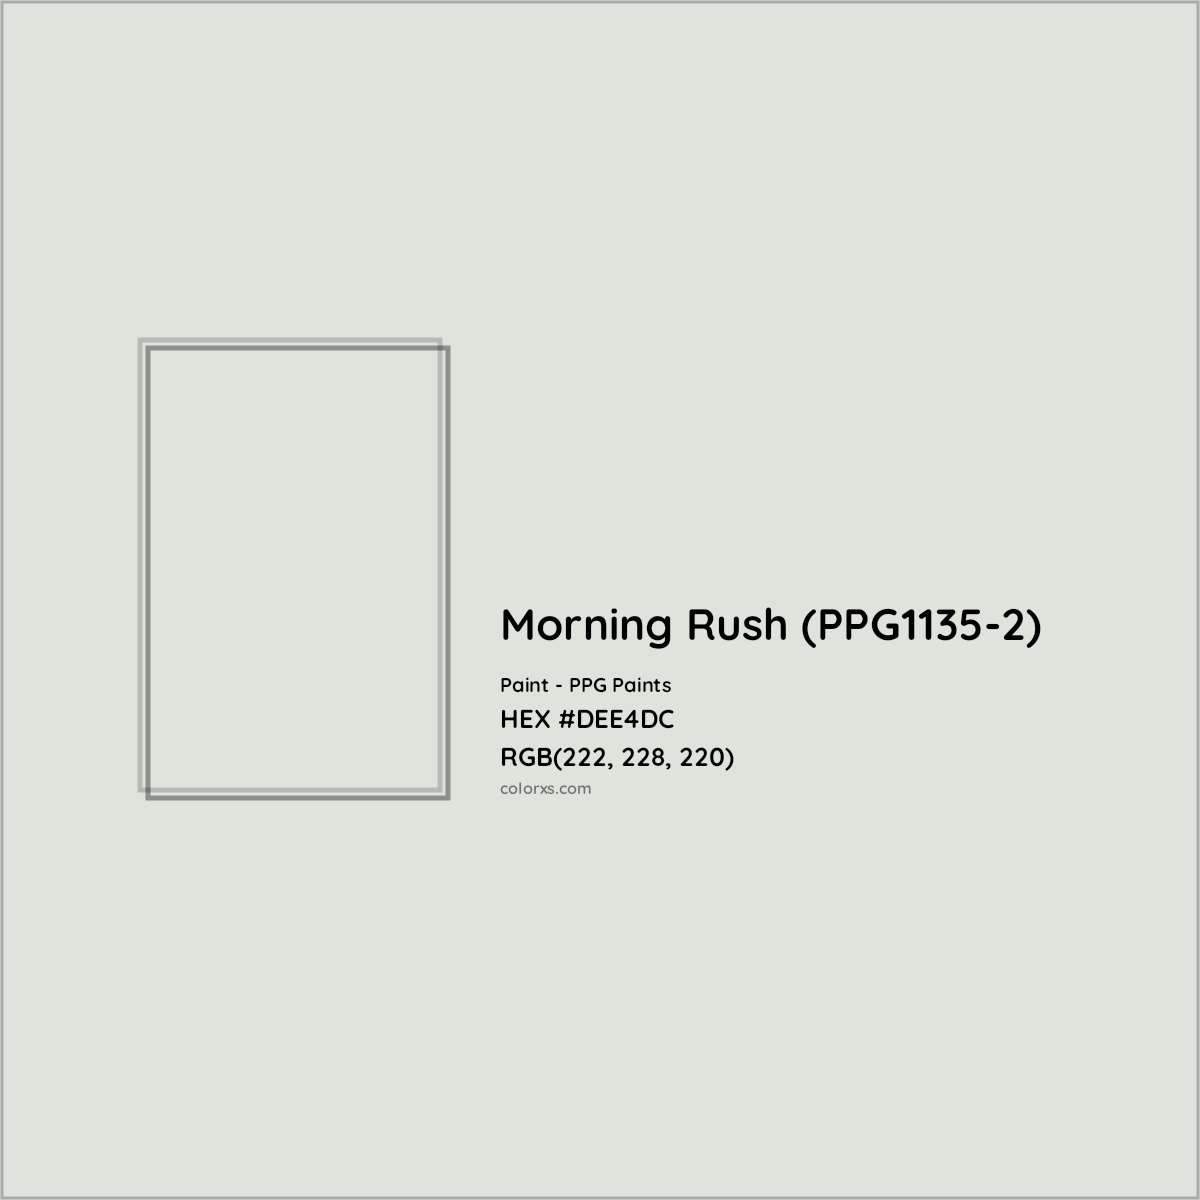 HEX #DEE4DC Morning Rush (PPG1135-2) Paint PPG Paints - Color Code